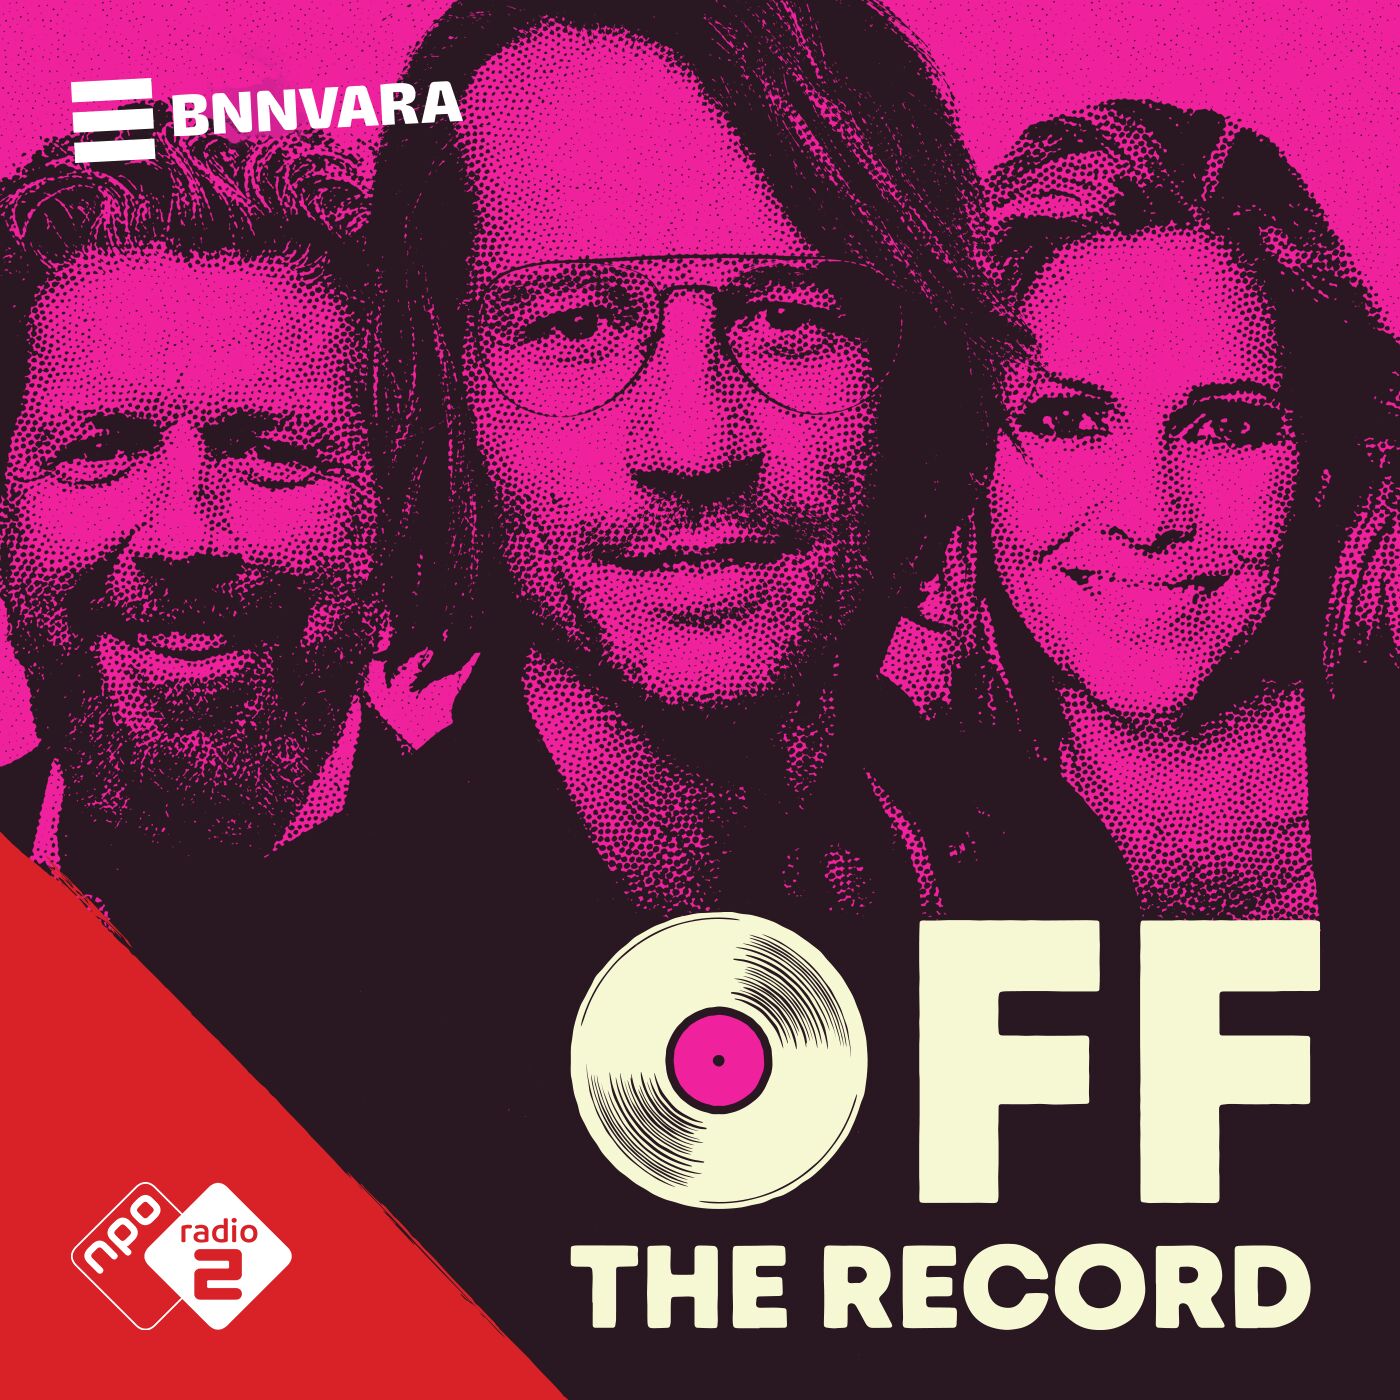 Off the Record logo